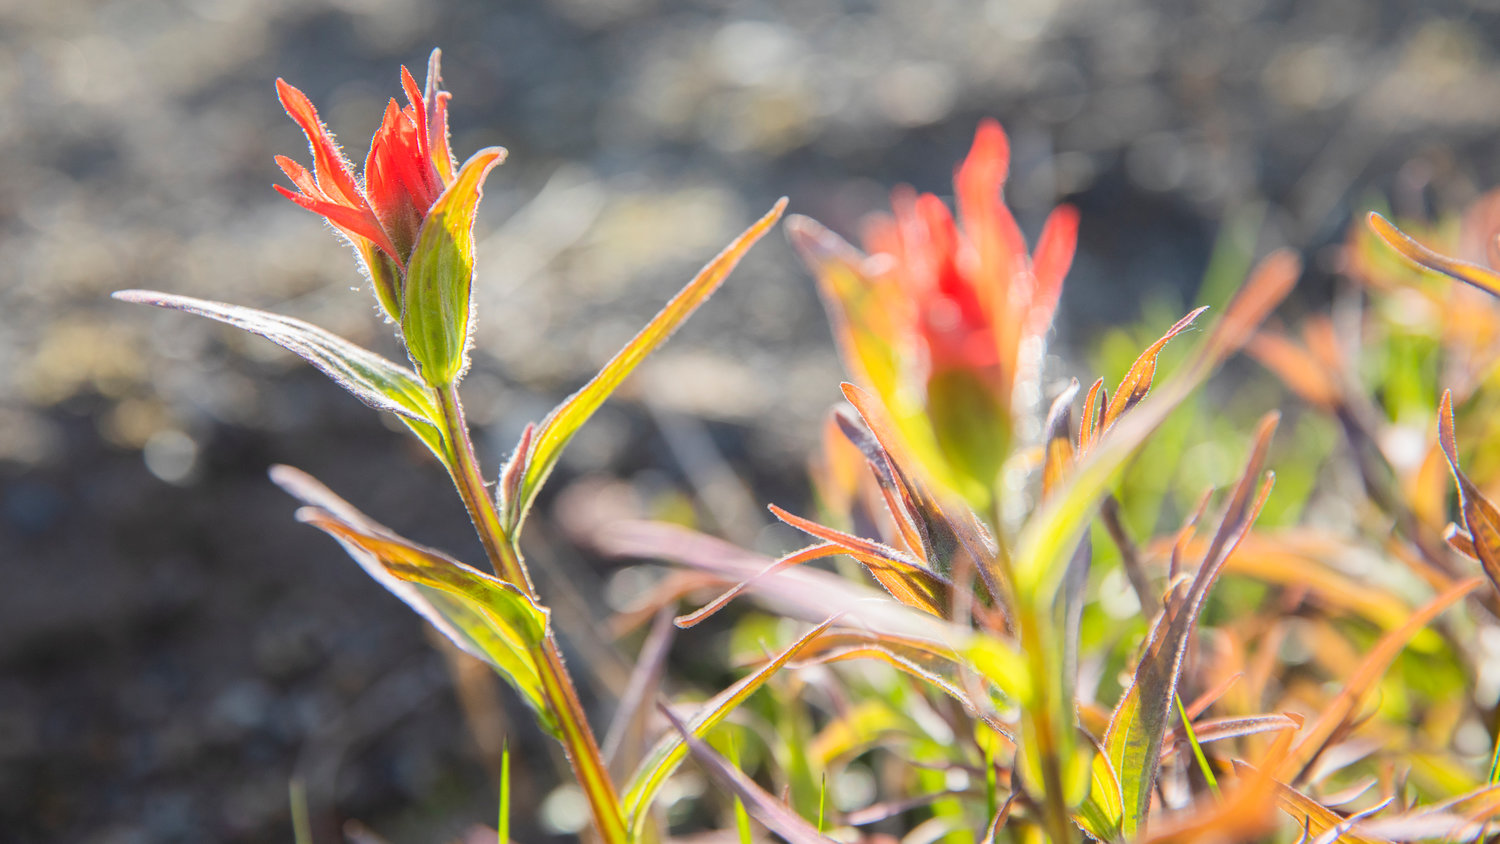 Red Indian Paintbrush sprouts from the ground near the Johnston Ridge Observatory and Mount St. Helens National Volcanic Monument.